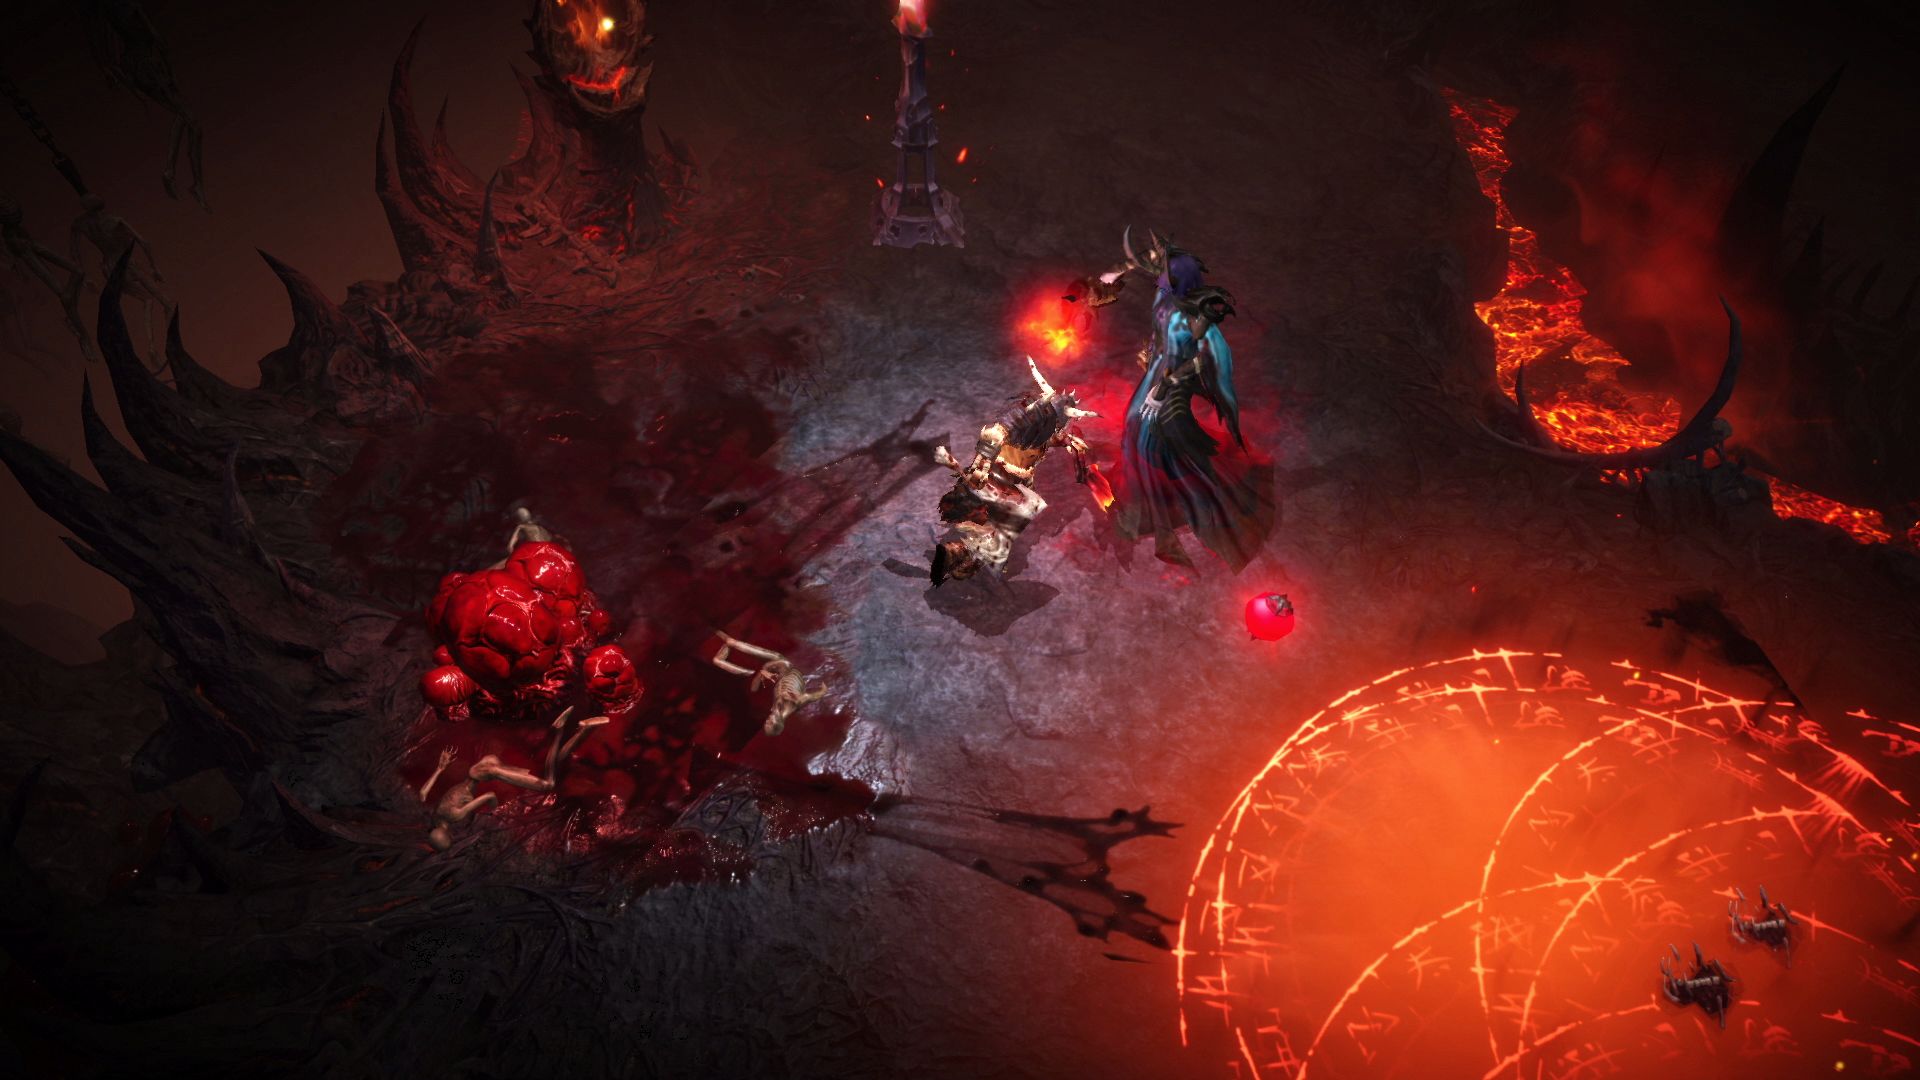 Diablo Immortal Leveling: A barbarian wielding two axes faces off against a Helliquary spellcaster boss on a platform above a river of lava.